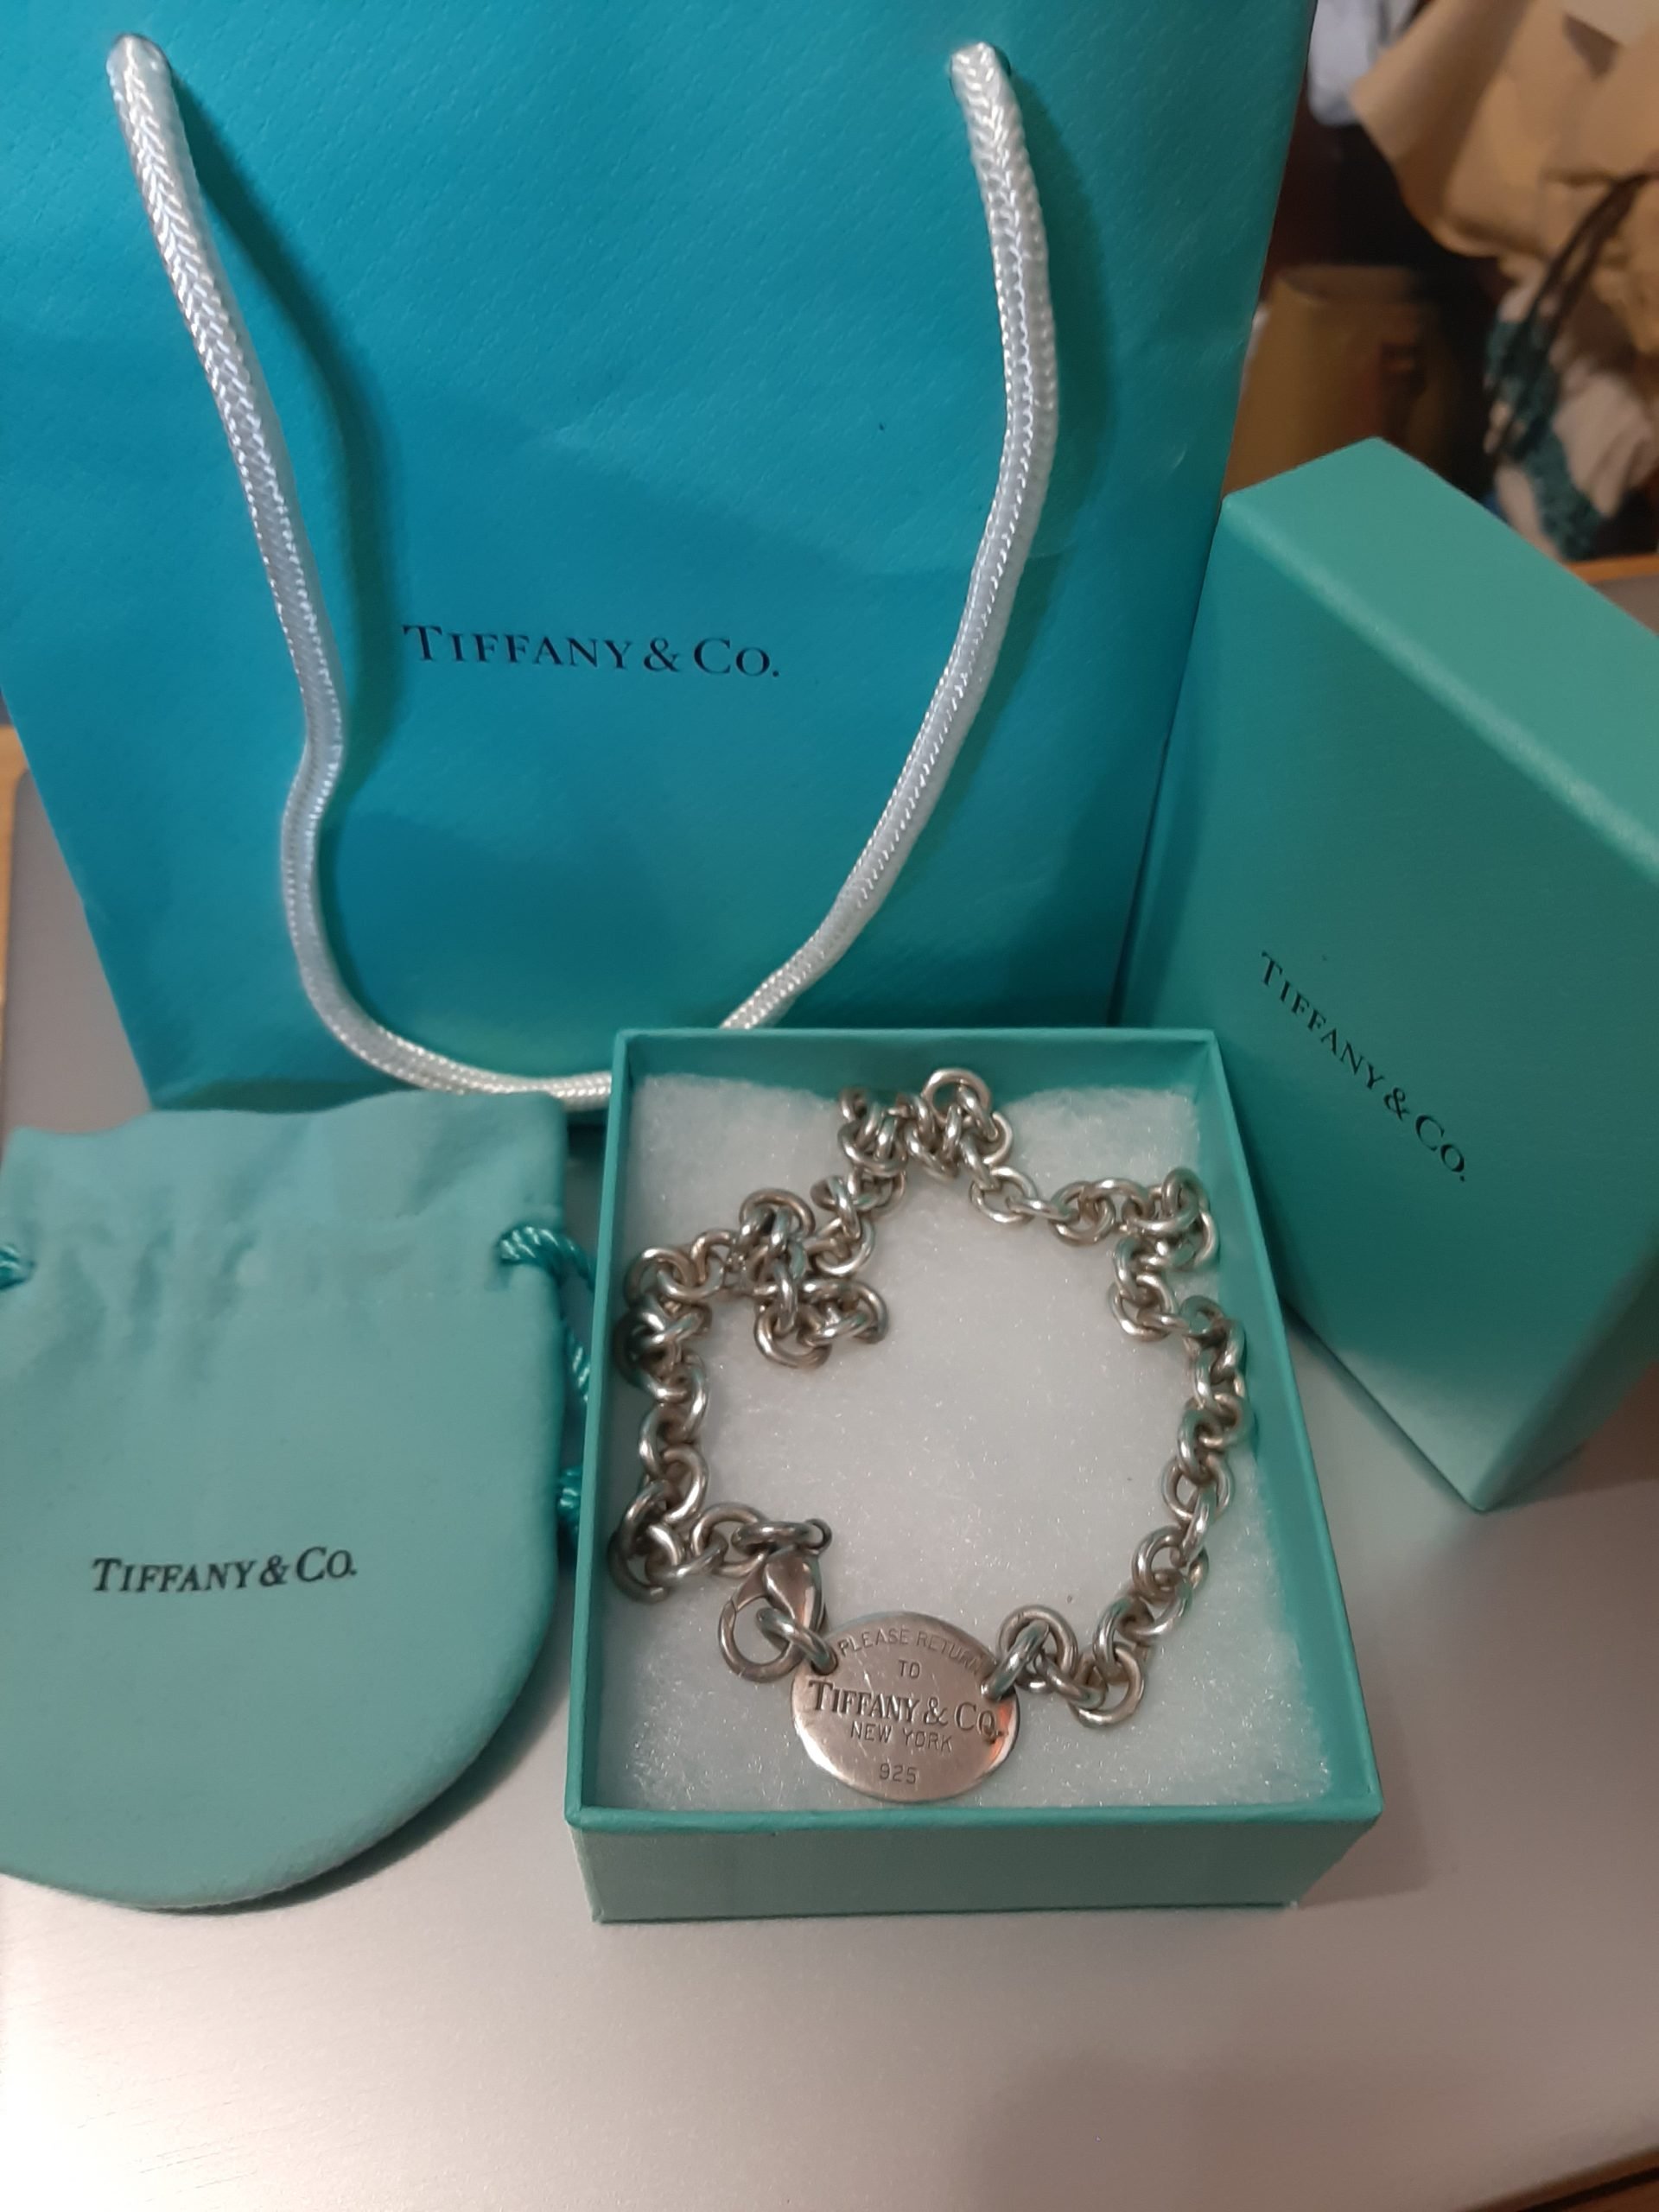 Authentic Tiffany’s women’s necklace